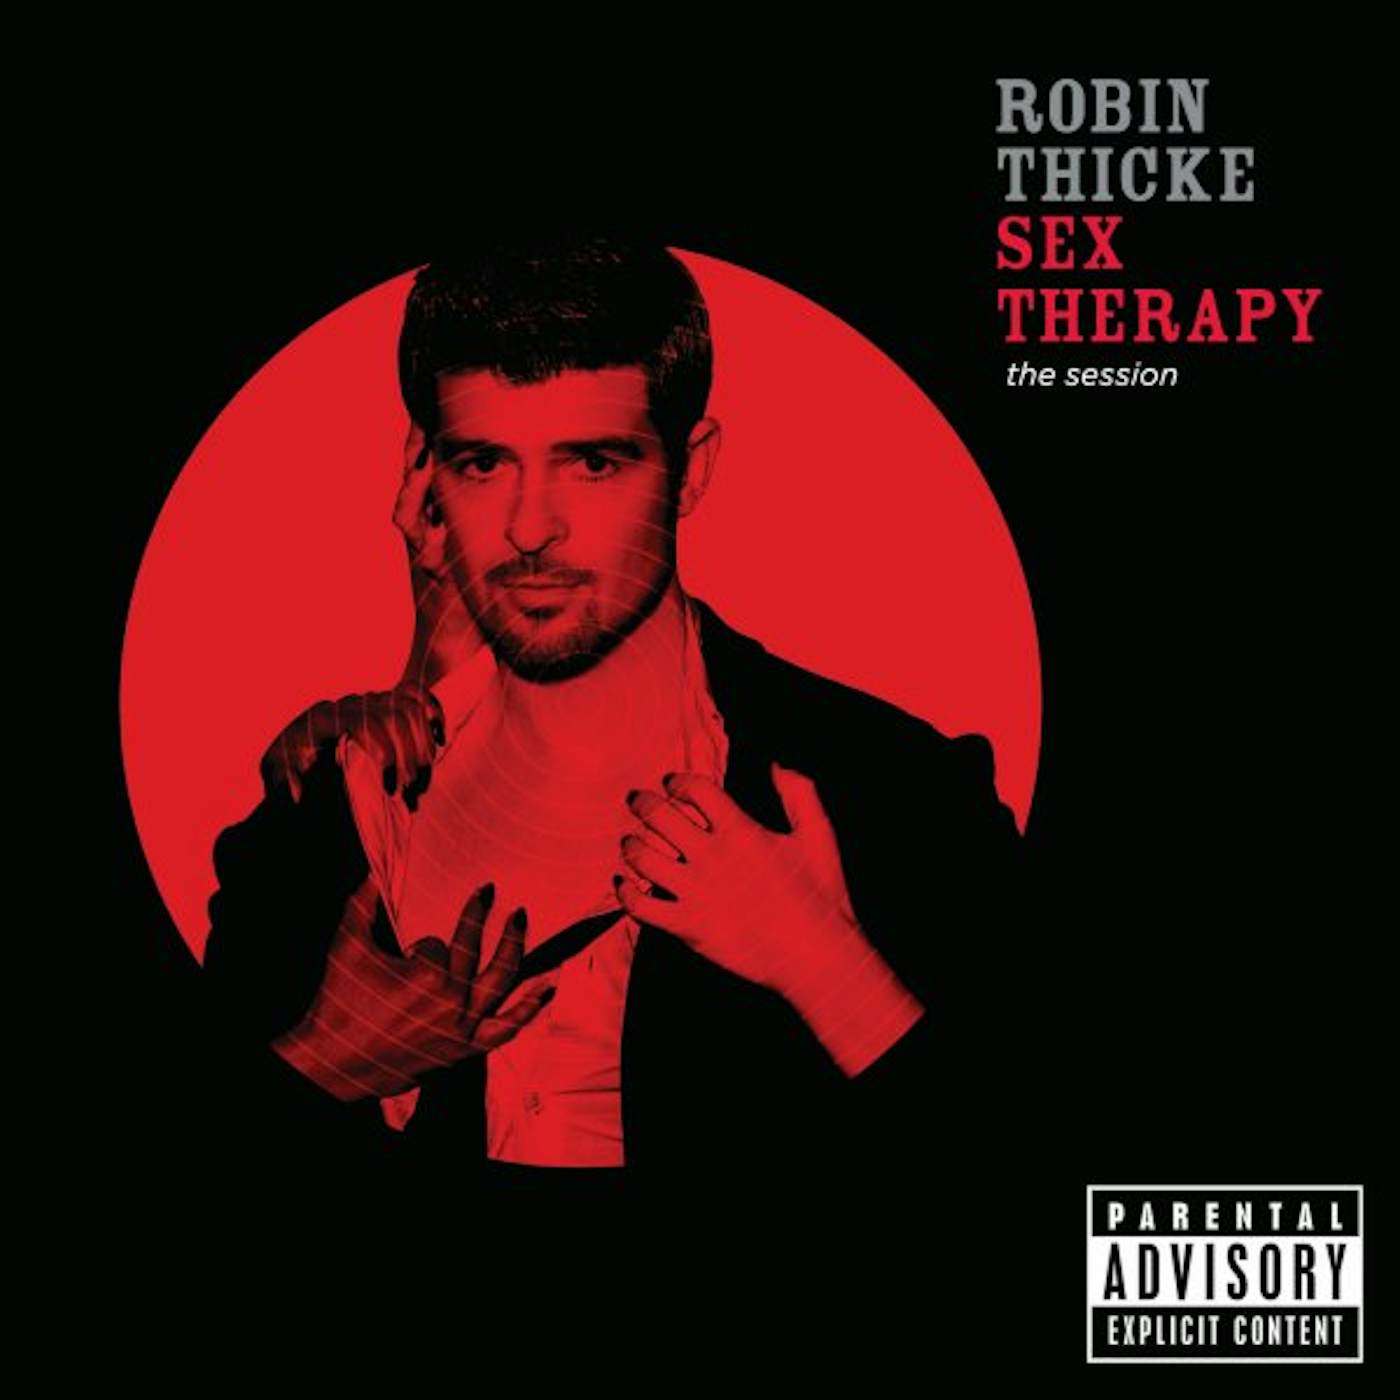 Robin Thicke SEX THERAPY: THE SESSION CD